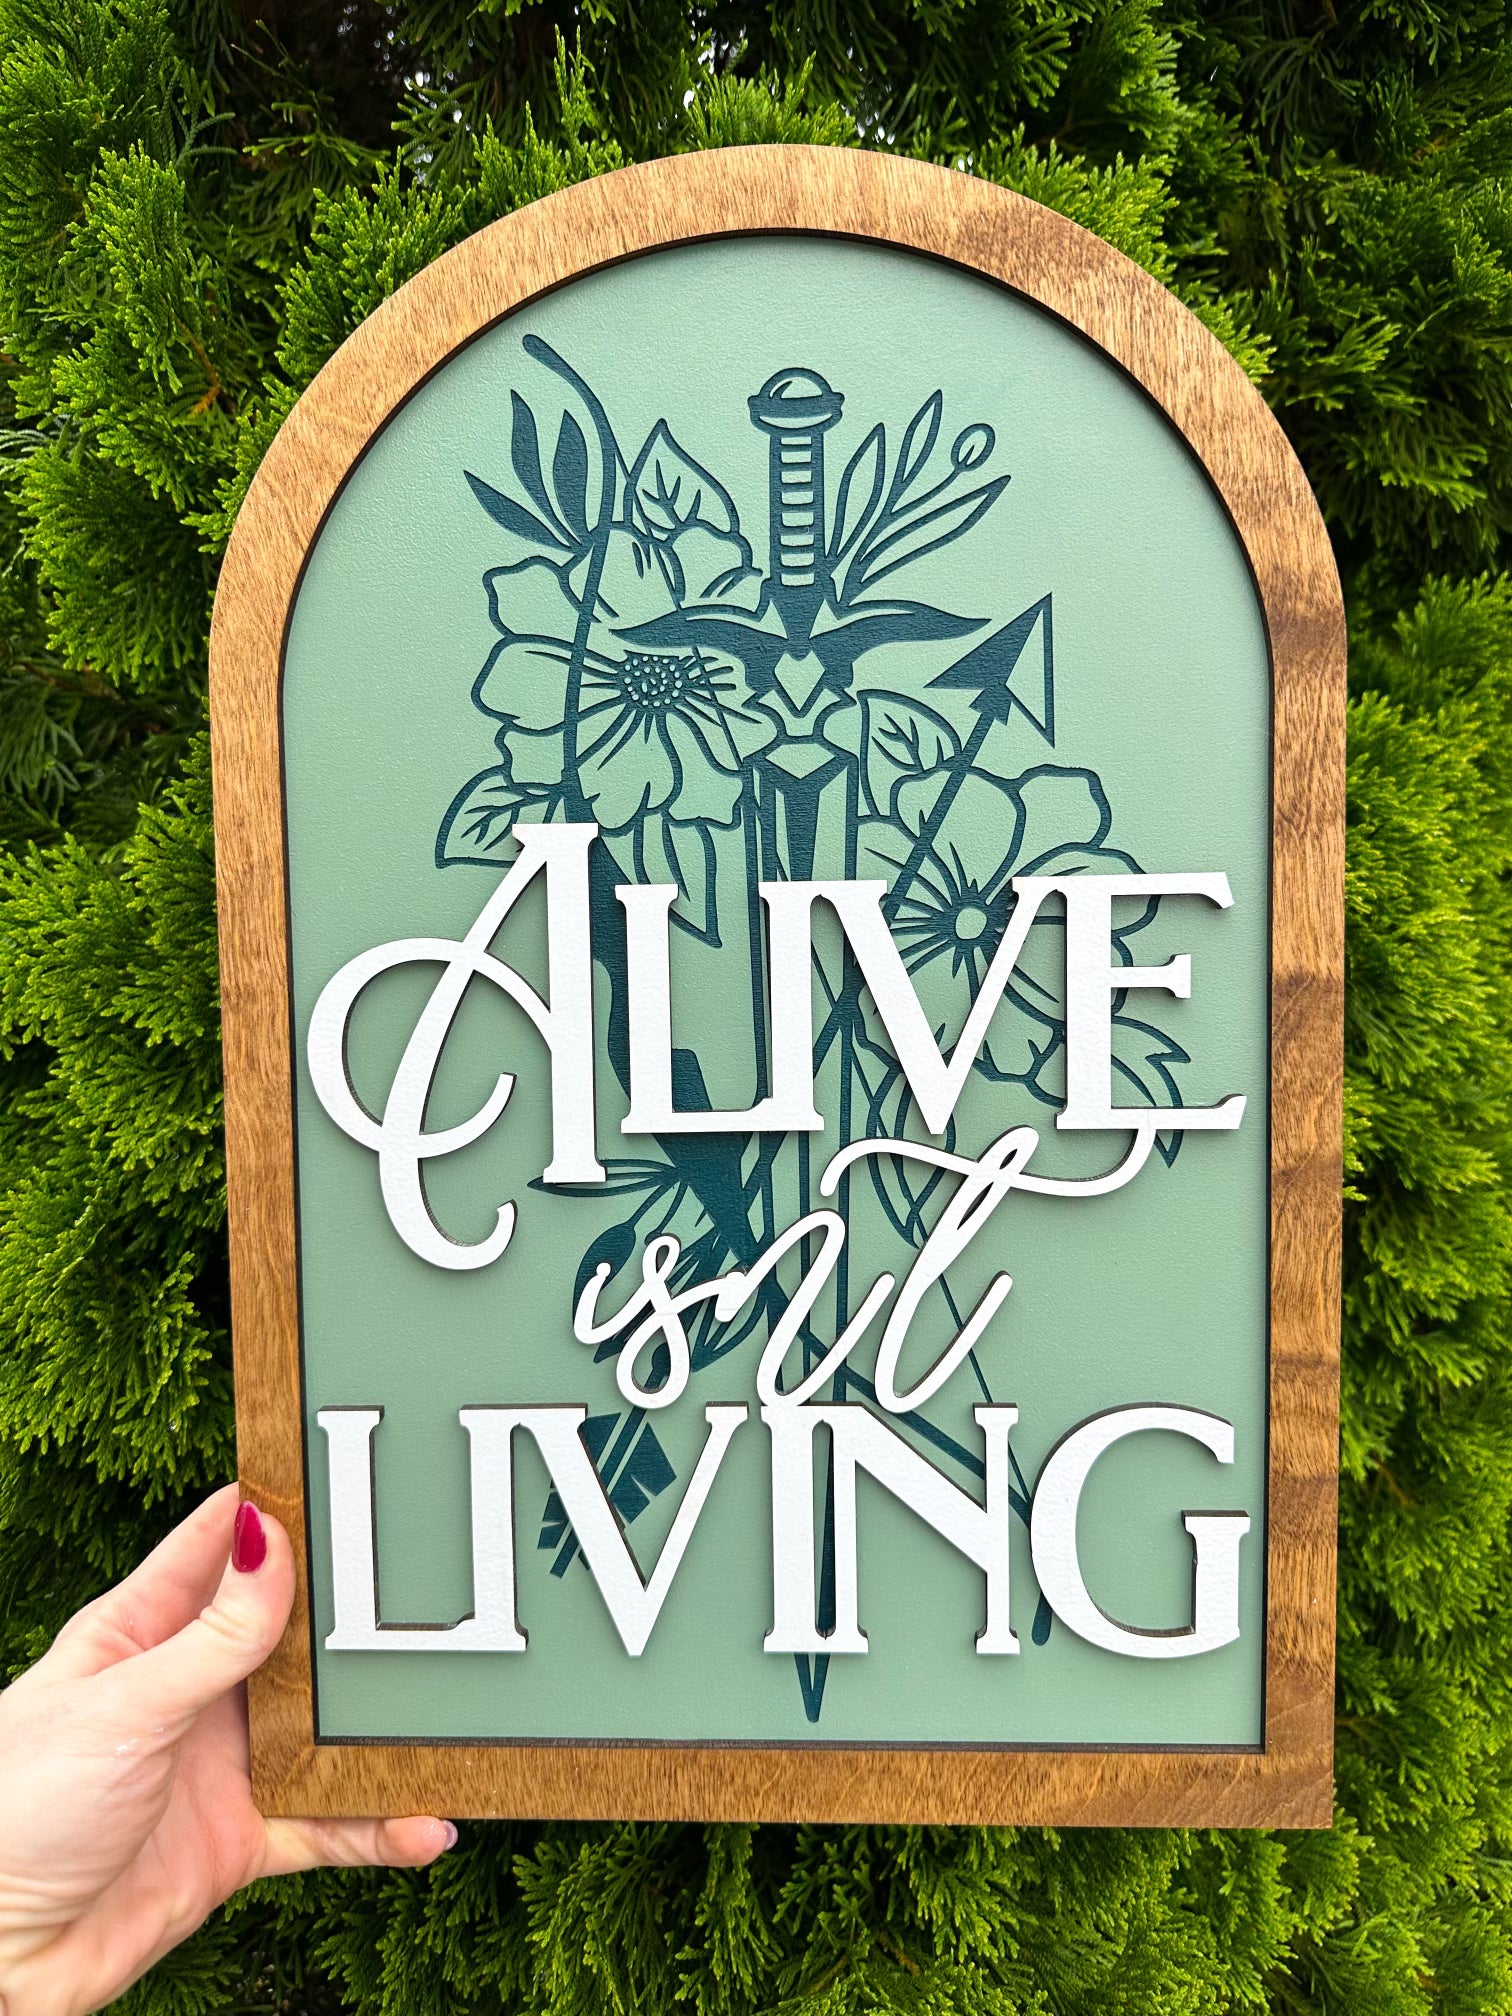 The Bridge Kingdom - Alive Isn't Living sign created by FireDrake Artistry®